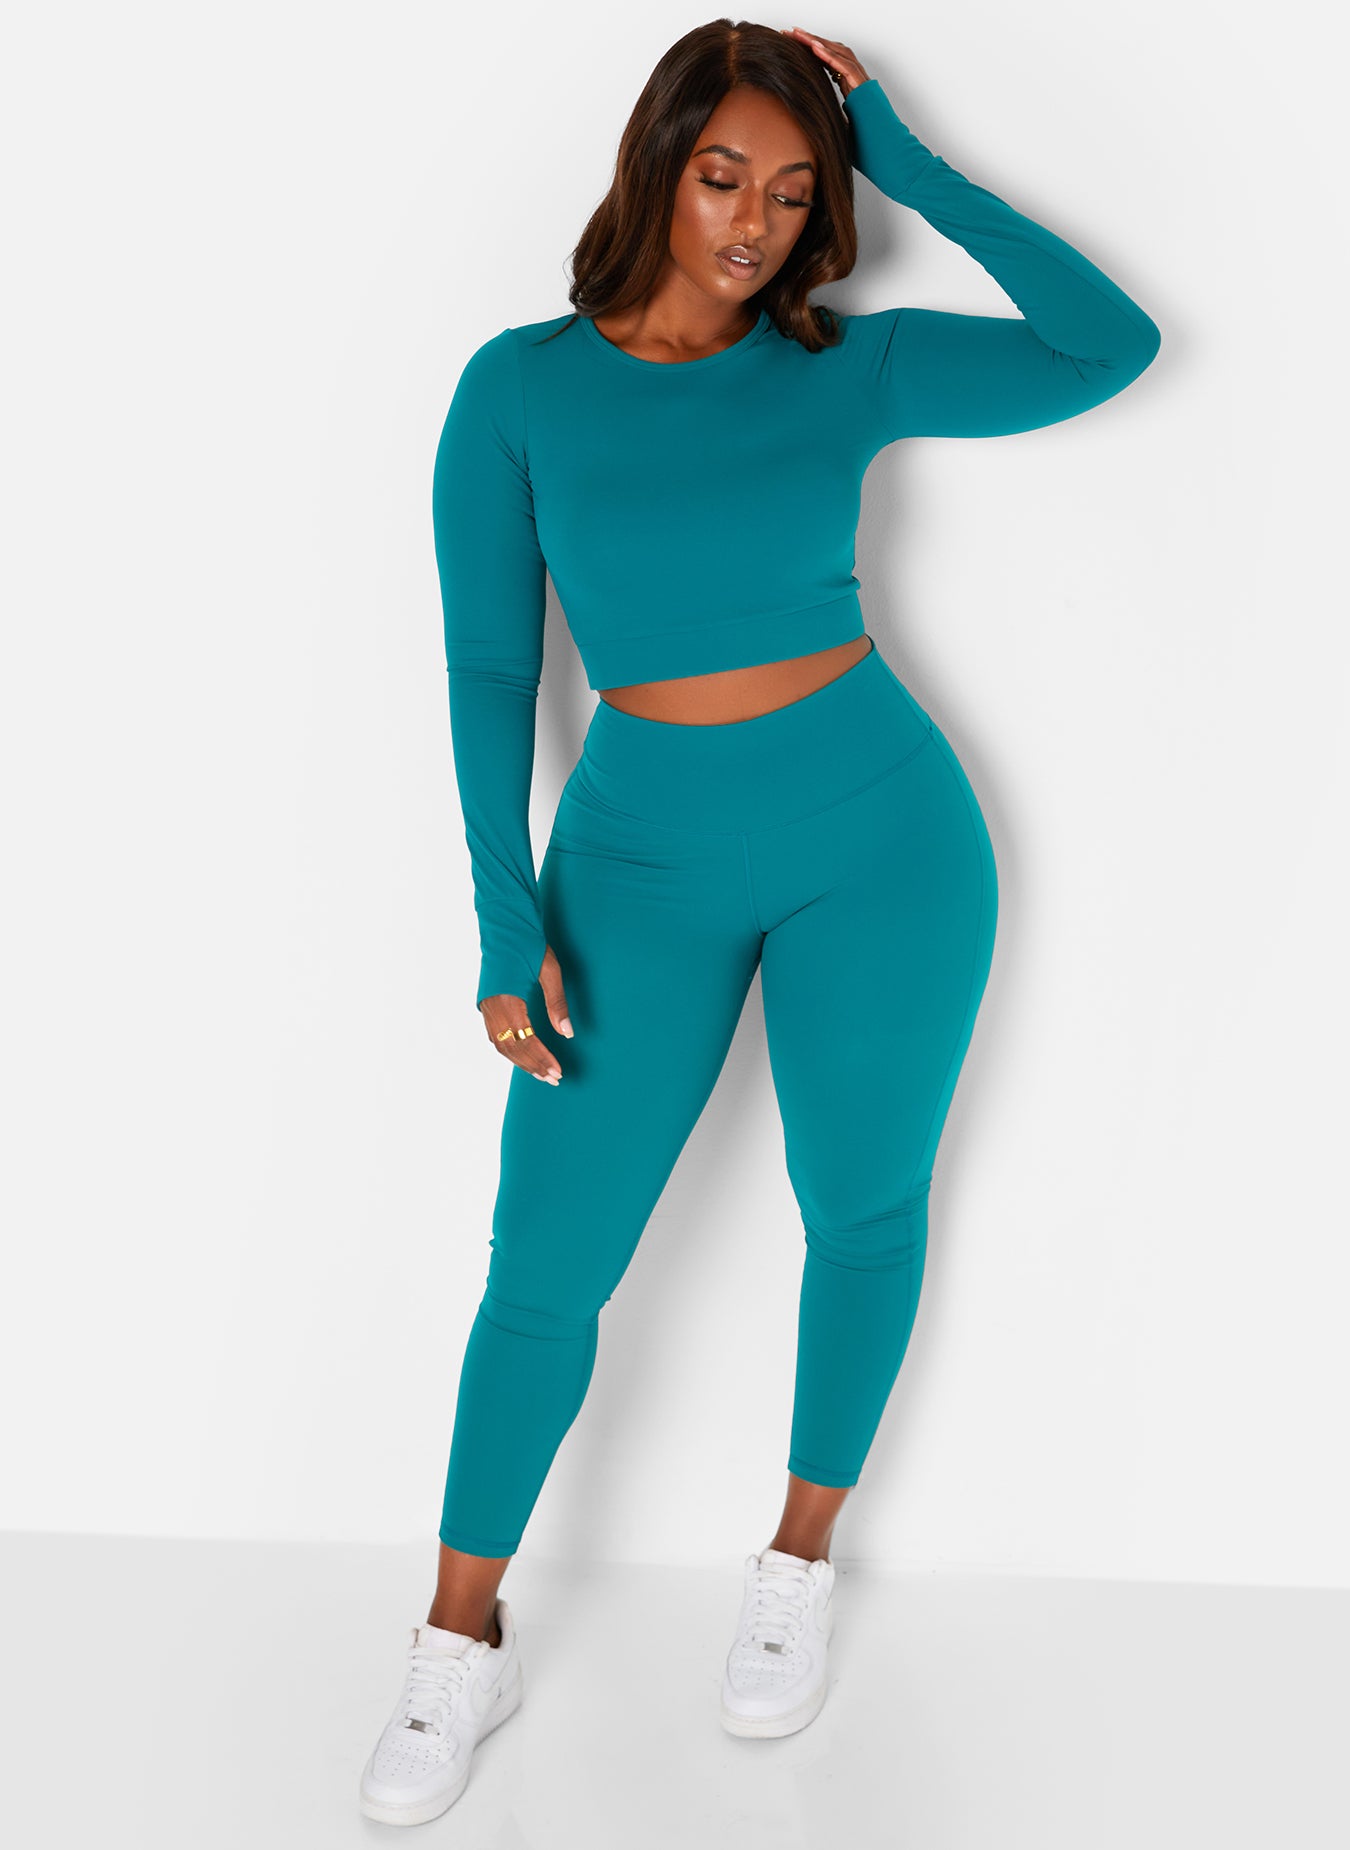 Teal Bad Habits Long Sleeve Sports Crop Top Plus Sizes